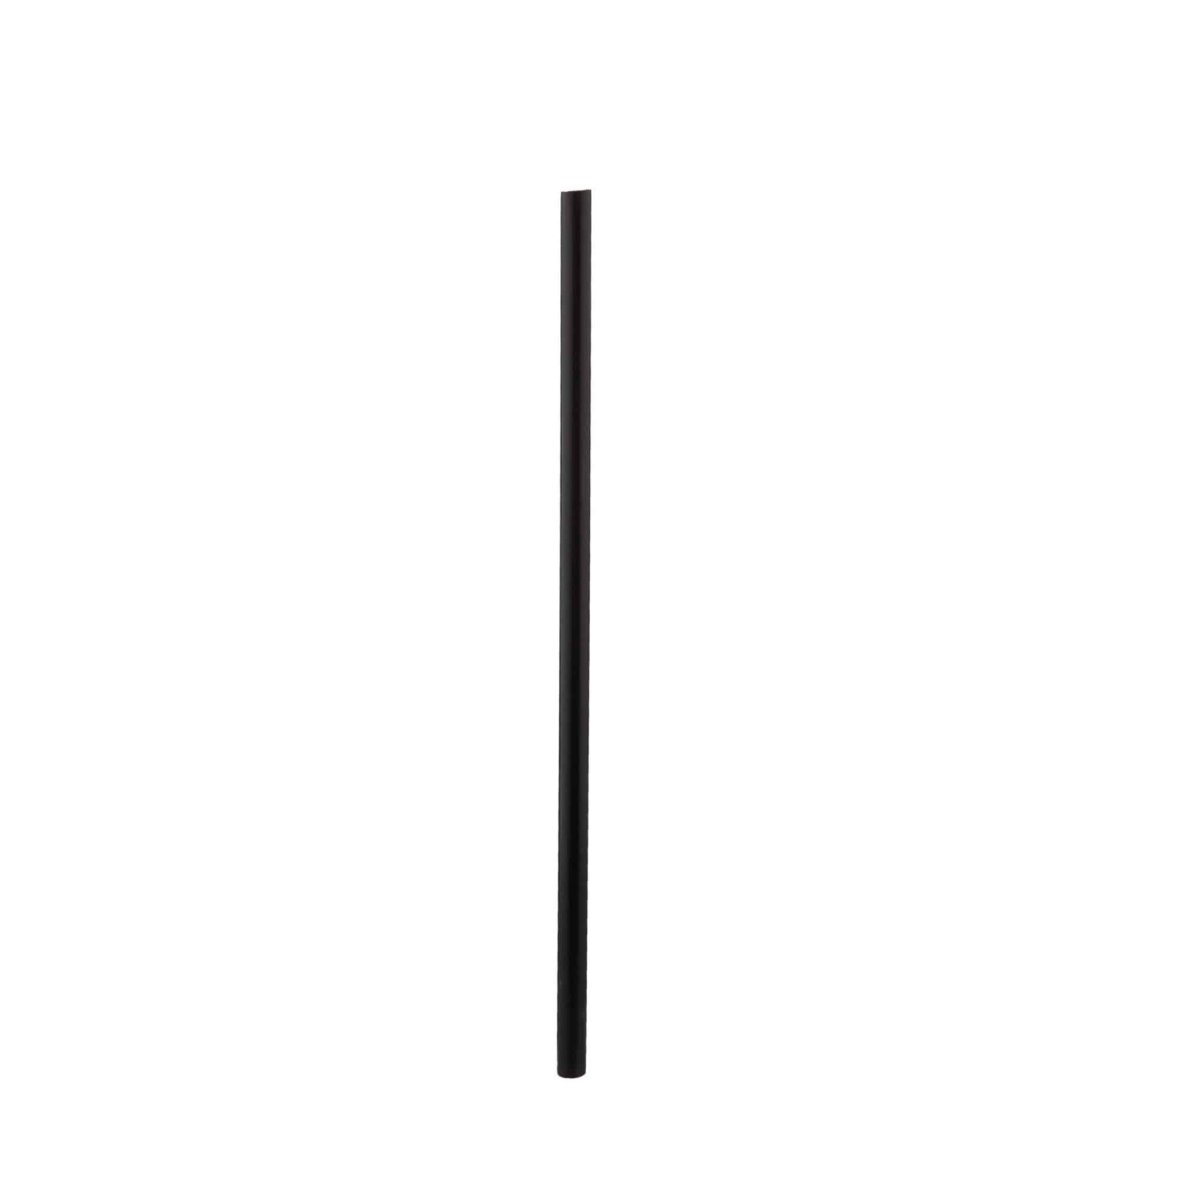 7mm Black Straight Straw Wrapped 250 Pieces x 40 Packet - hotpackwebstore.com - Plastic Straws